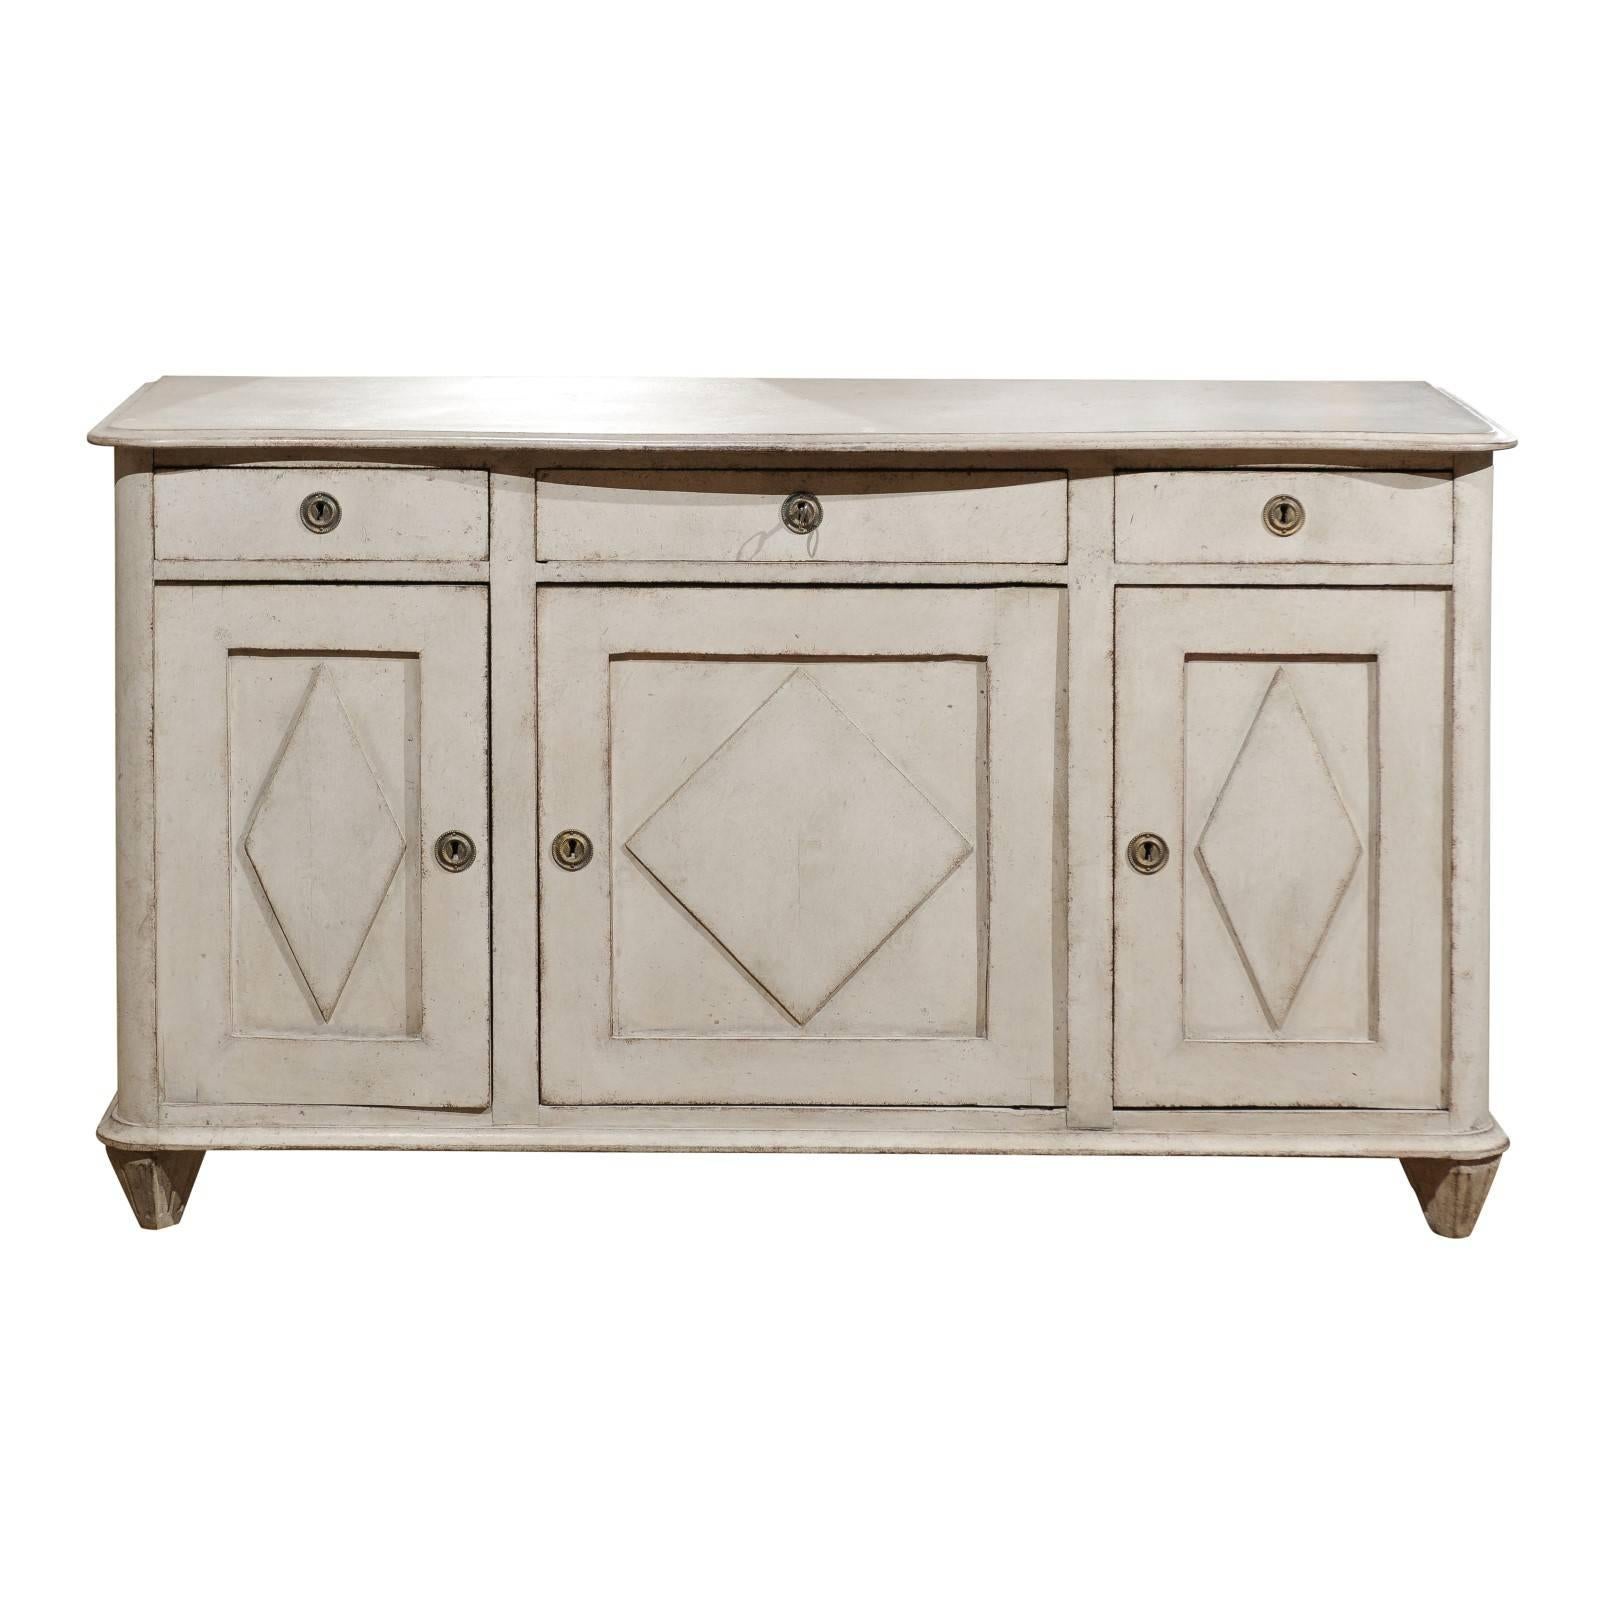 Swedish Light Grey Gustavian Style 1850s Enfilade with Doors and Drawers